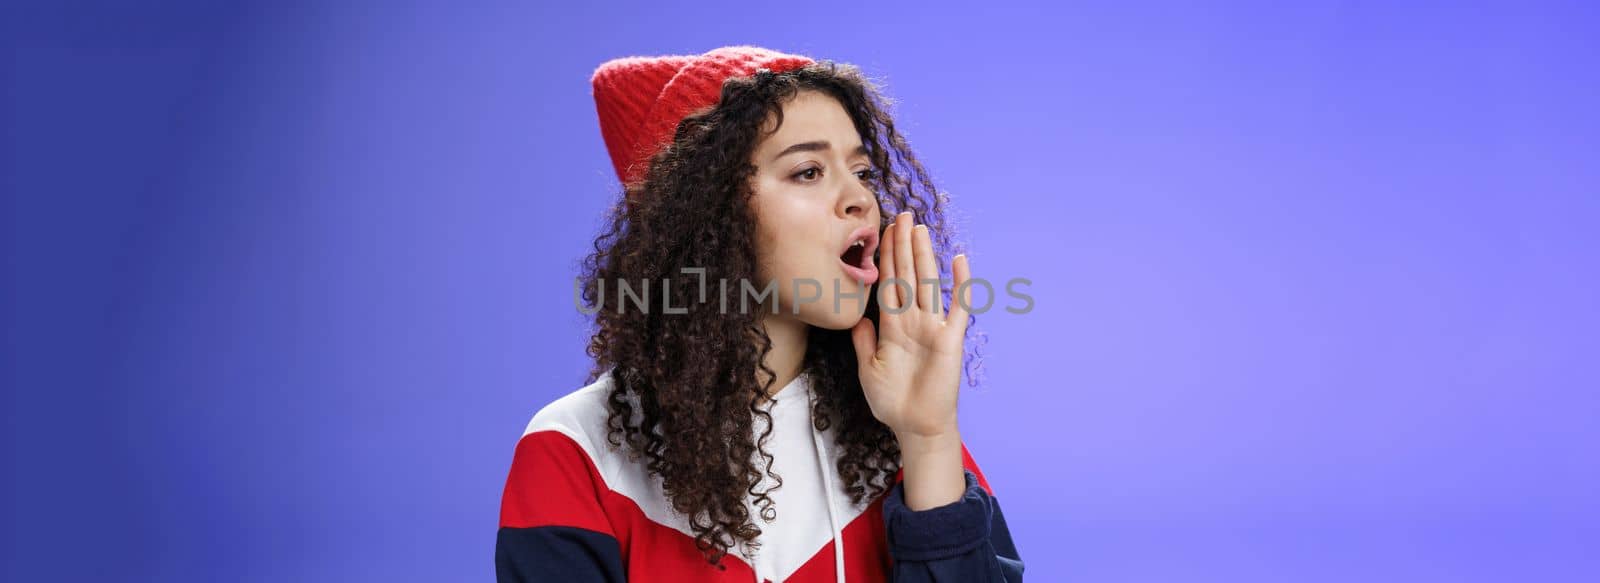 Portrait of worried sister calling sibling outdoors open mouth looking left seriously and holding palm near lips as shouting name searching someone, posing concerned over blue background.